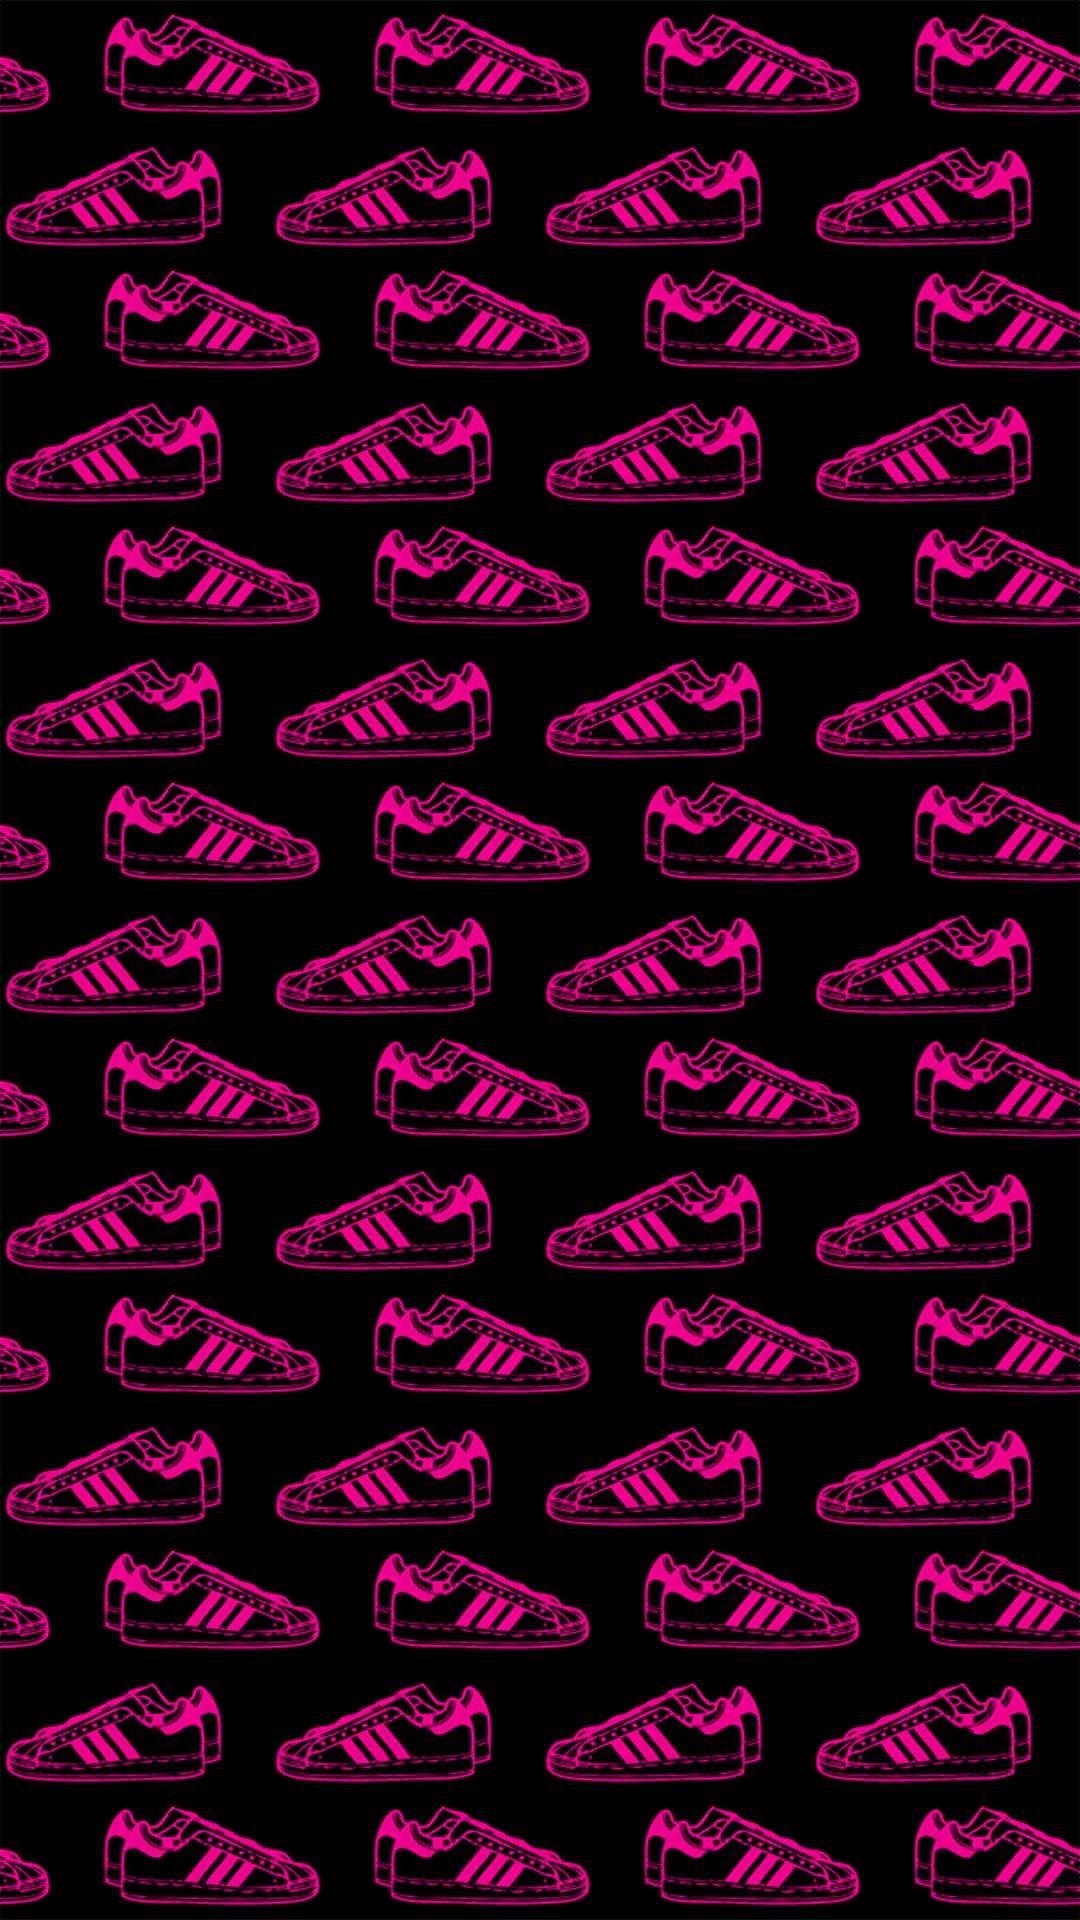 Adidas Wallpaper for iPhone X, 6